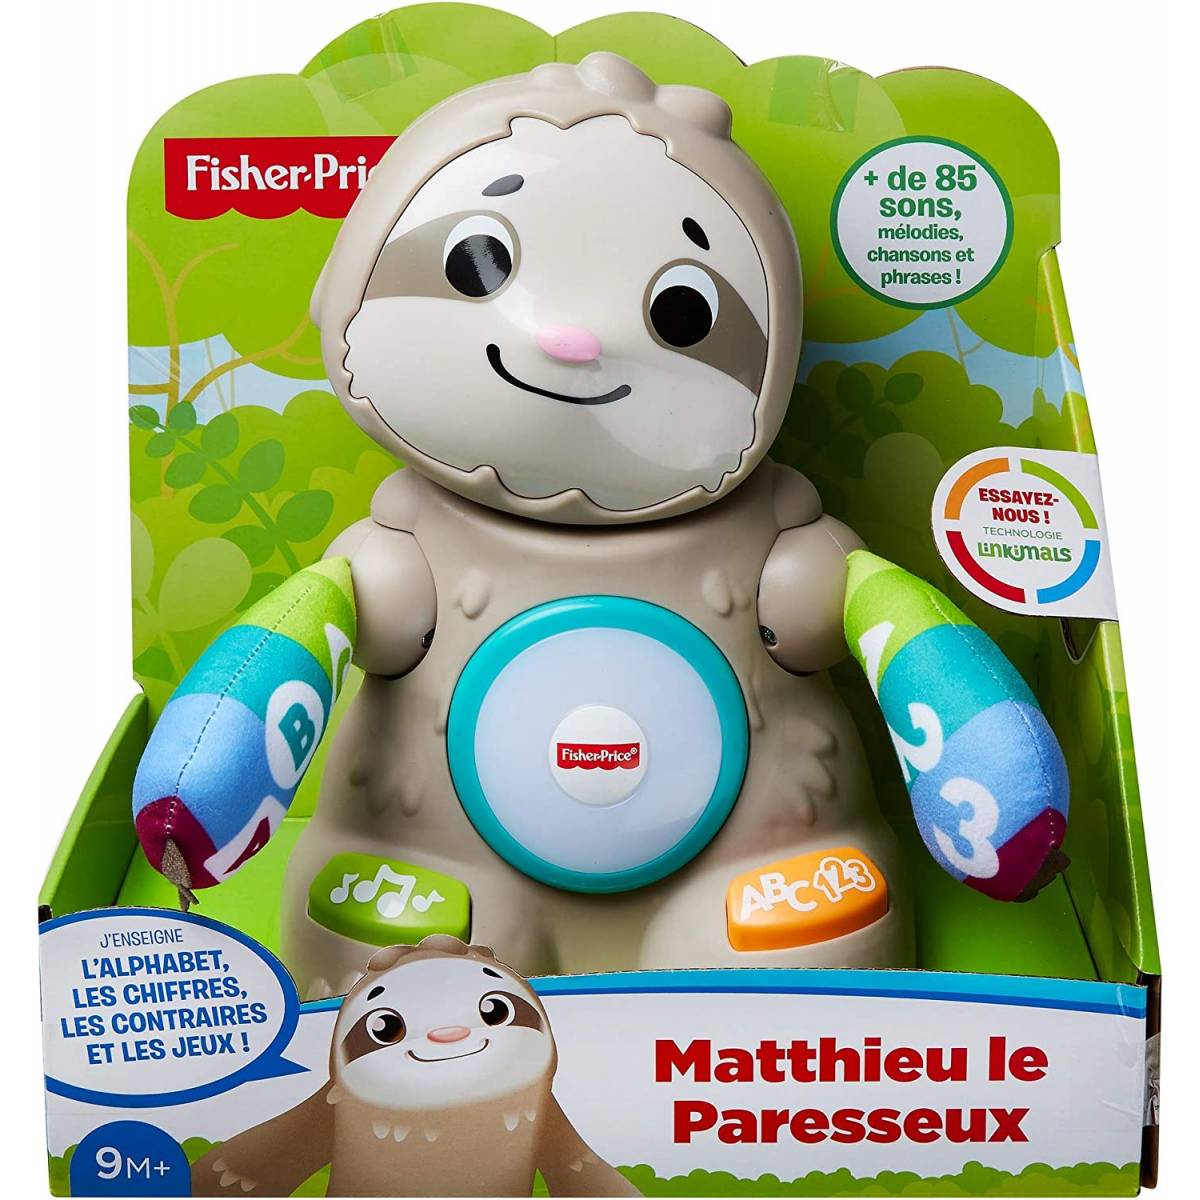 https://www.maxxidiscount.com/33807-large_default/educational-game-matthew-the-sloth-fisher-price-9m.jpg